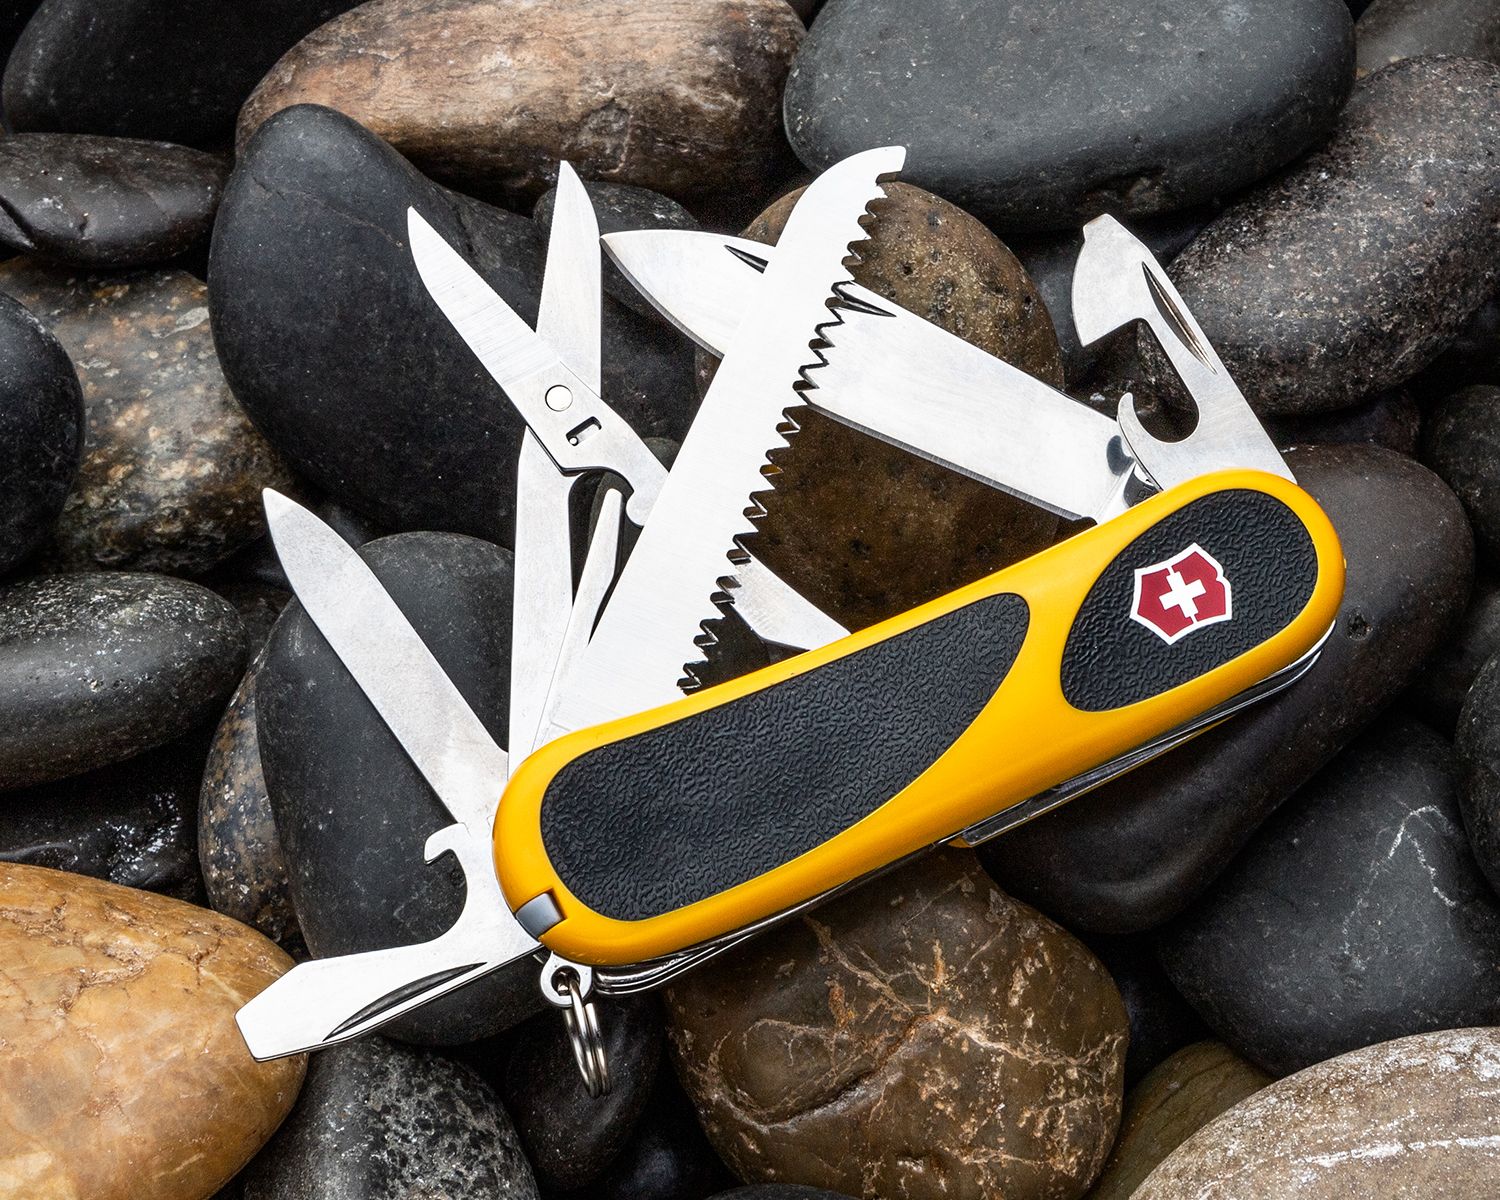 Victorinox Evolution Grip S18 Yellow Swiss Army Knife For Sale